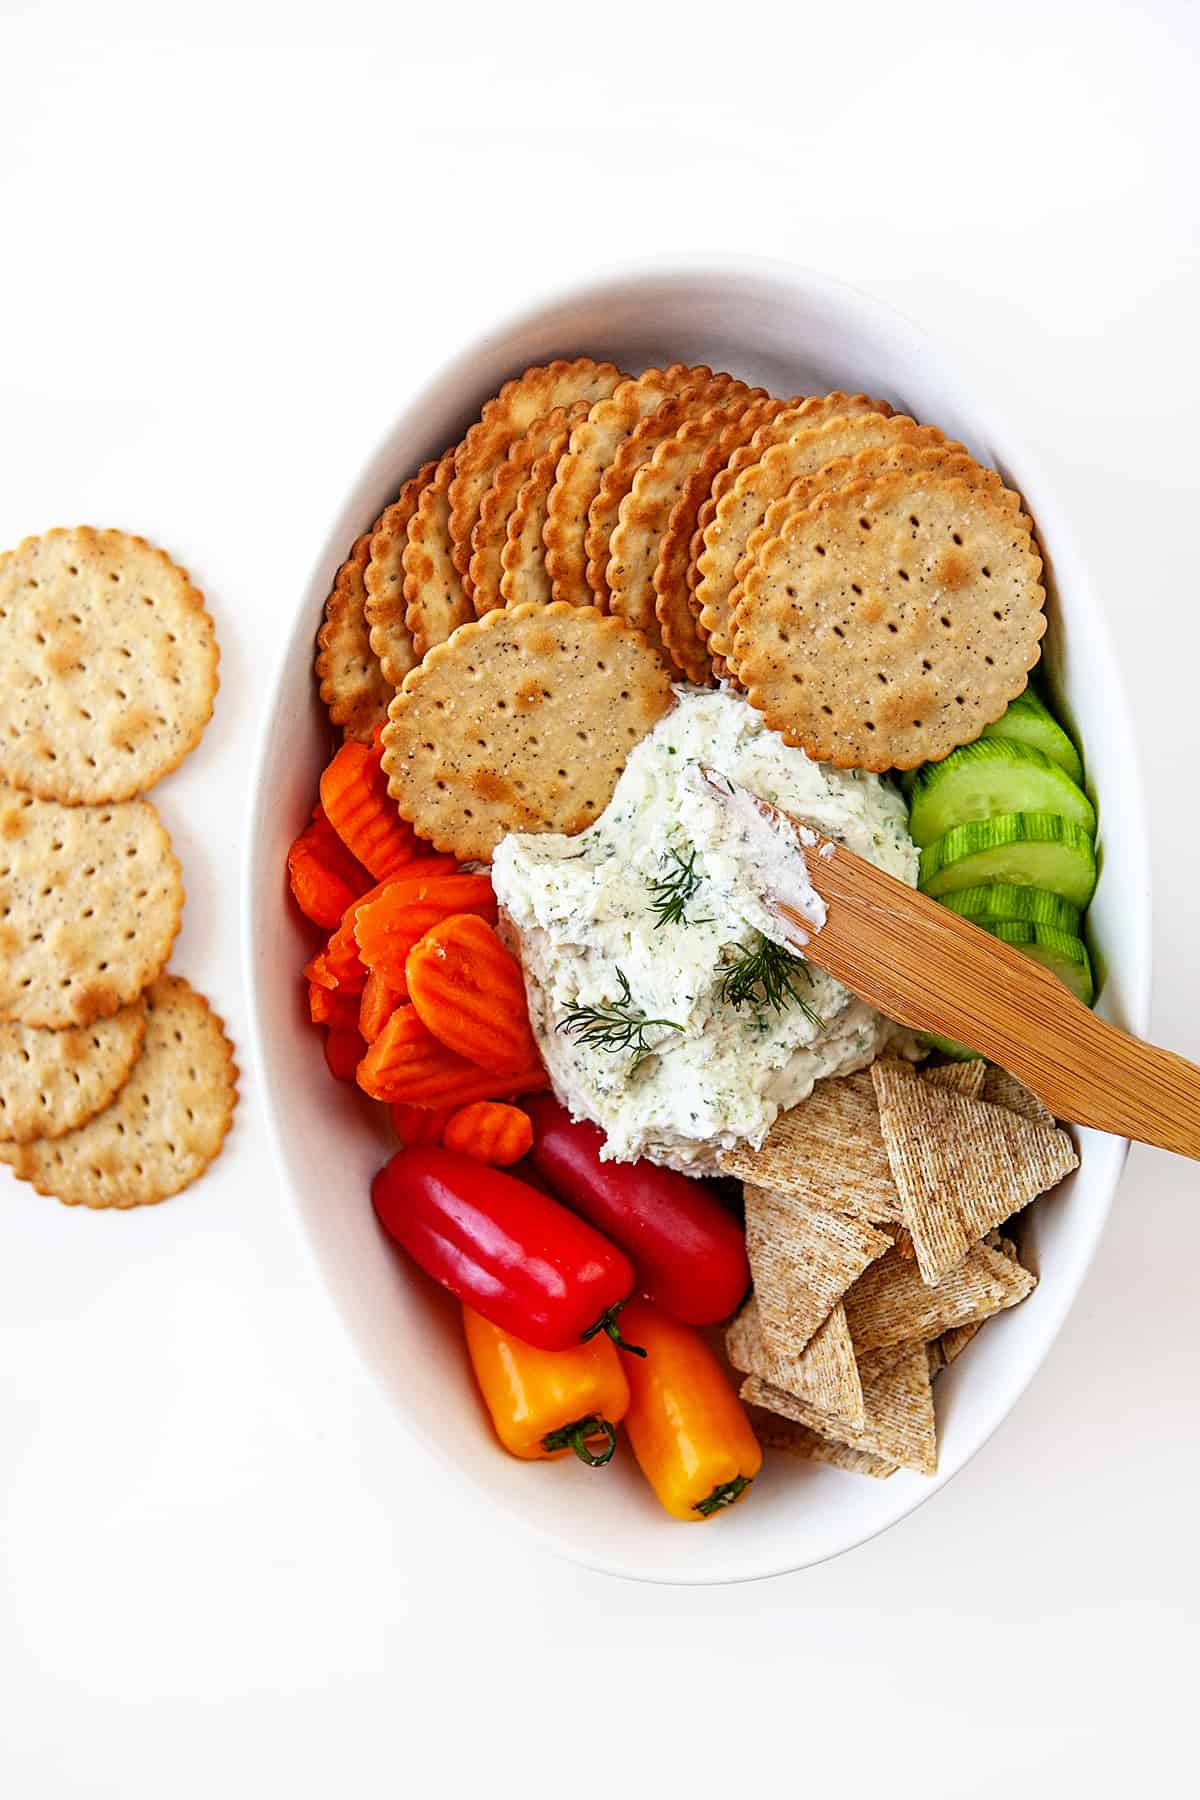 Homemade Boursin Cheese Recipe with Crackers and vegetables